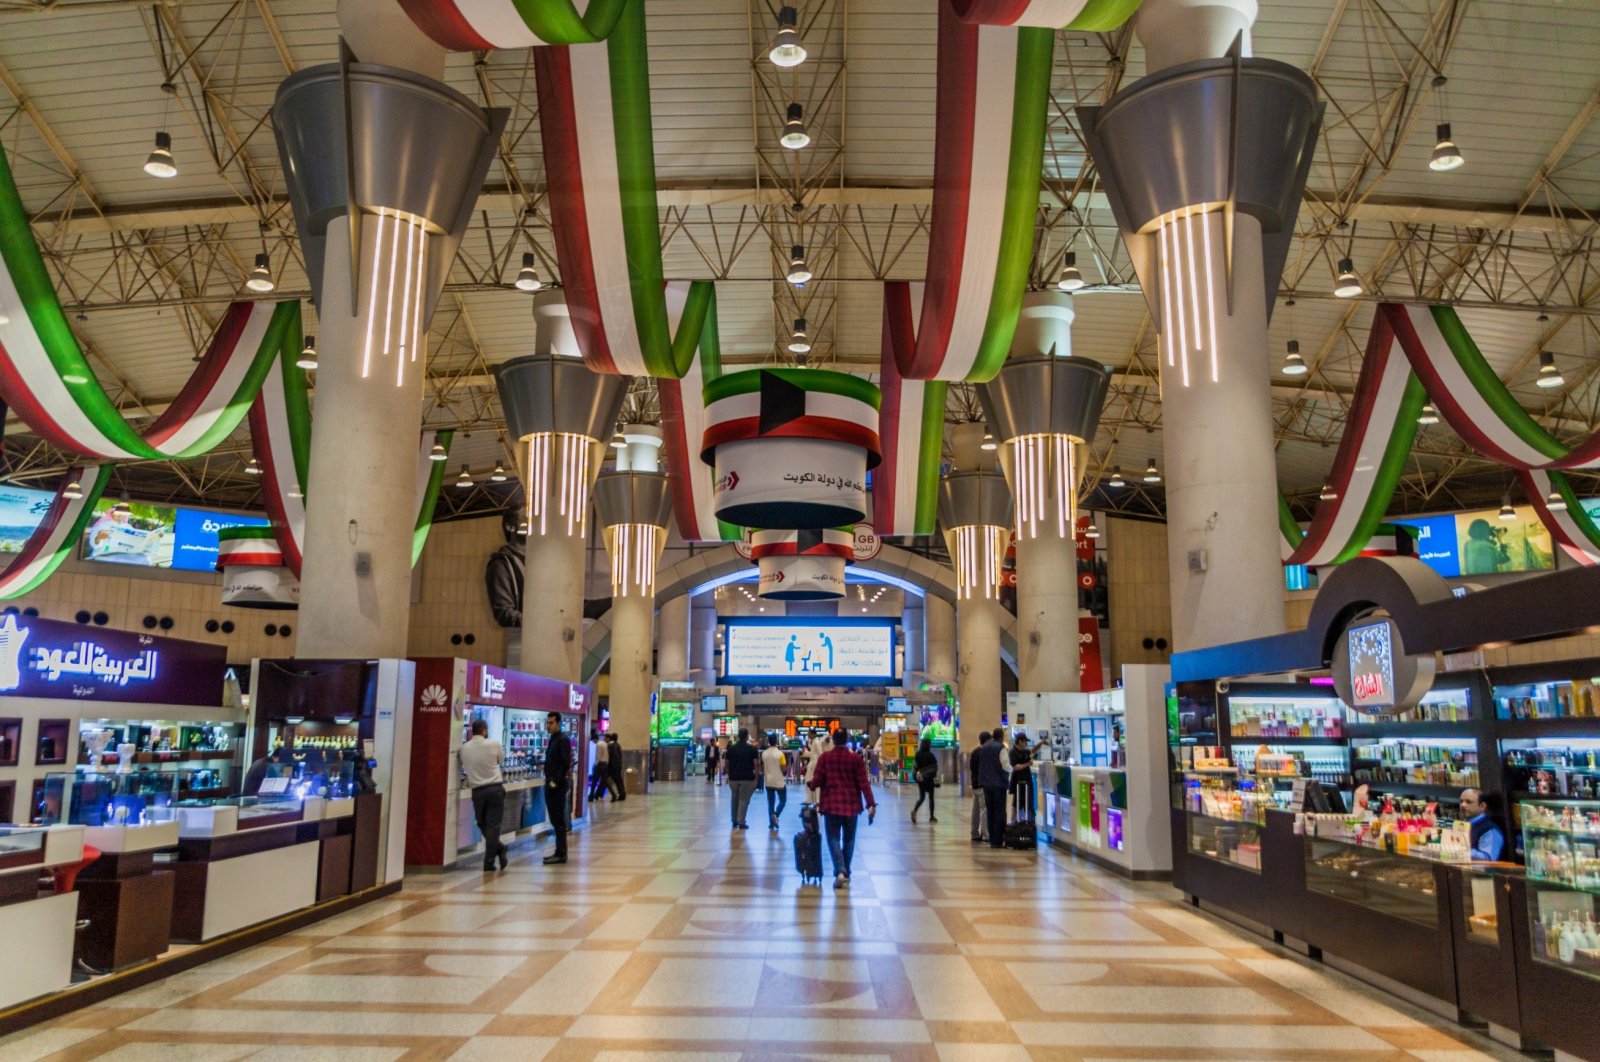 Interior of Kuwait International Airport is seen in this photo taken on March 19, 2017. (Shutterstock Photo)